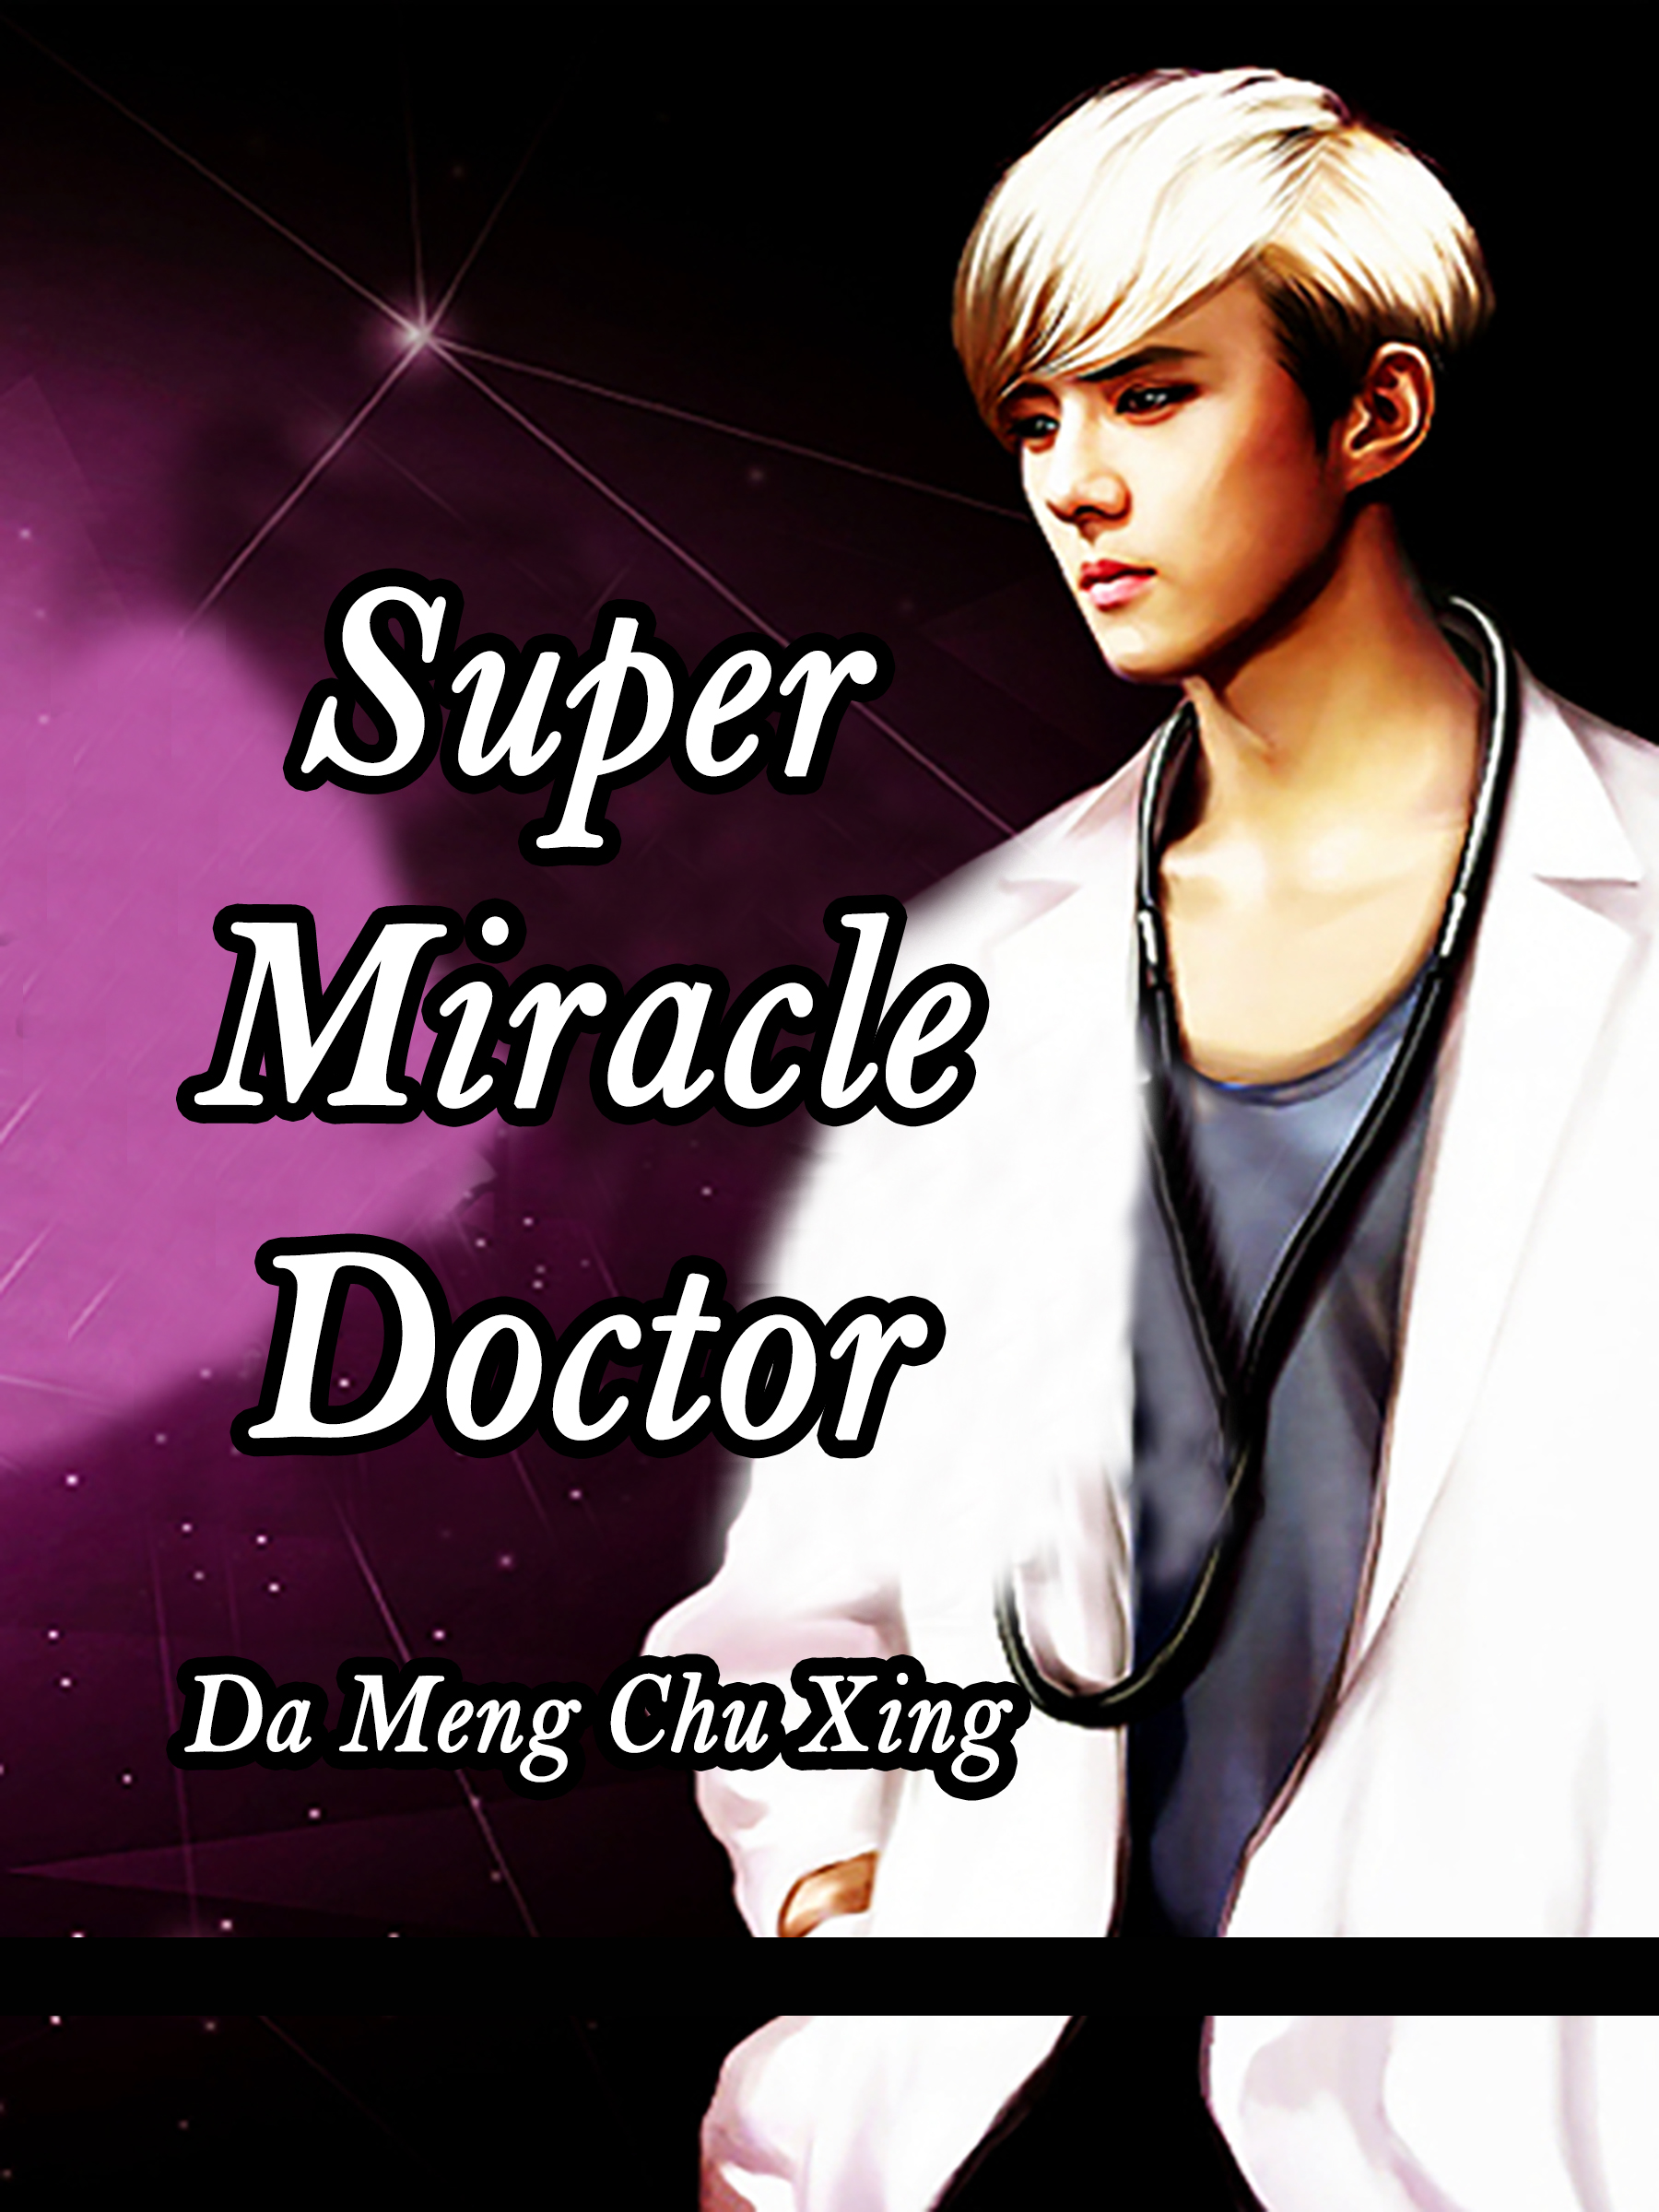 The story of a crazy miracle doctor